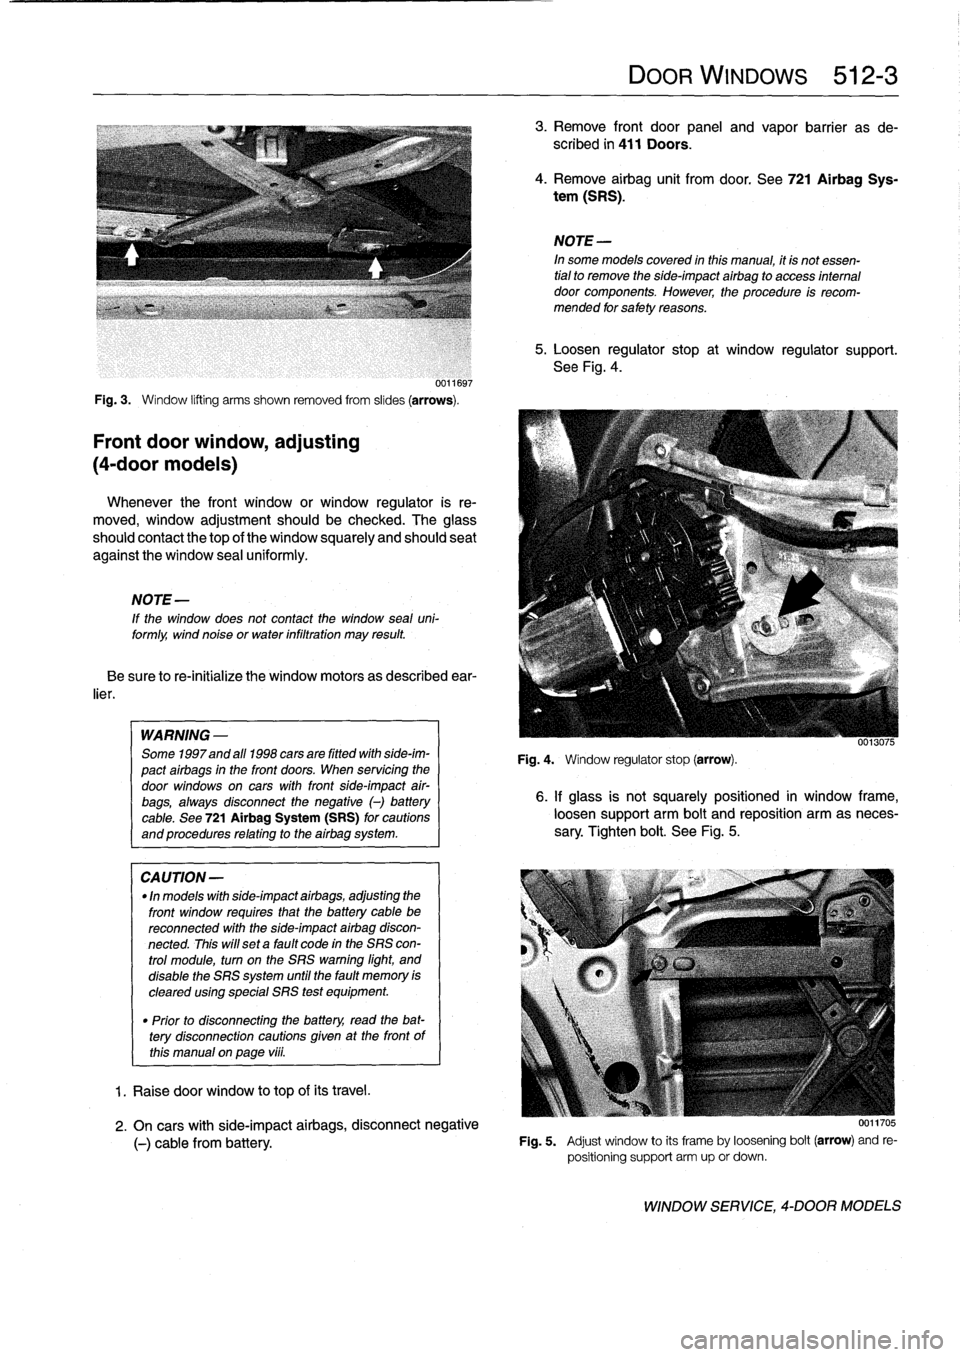 BMW 325i 1993 E36 Workshop Manual 
0011697

Fig
.
3
.

	

Window
lifting
arms
shown
removed
from
slides
(arrows)
.

Front
door
window,
adjusting

(4-door
models)

Whenever
the
front
window
or
window
regulator
is
re-

moved,
window
adj